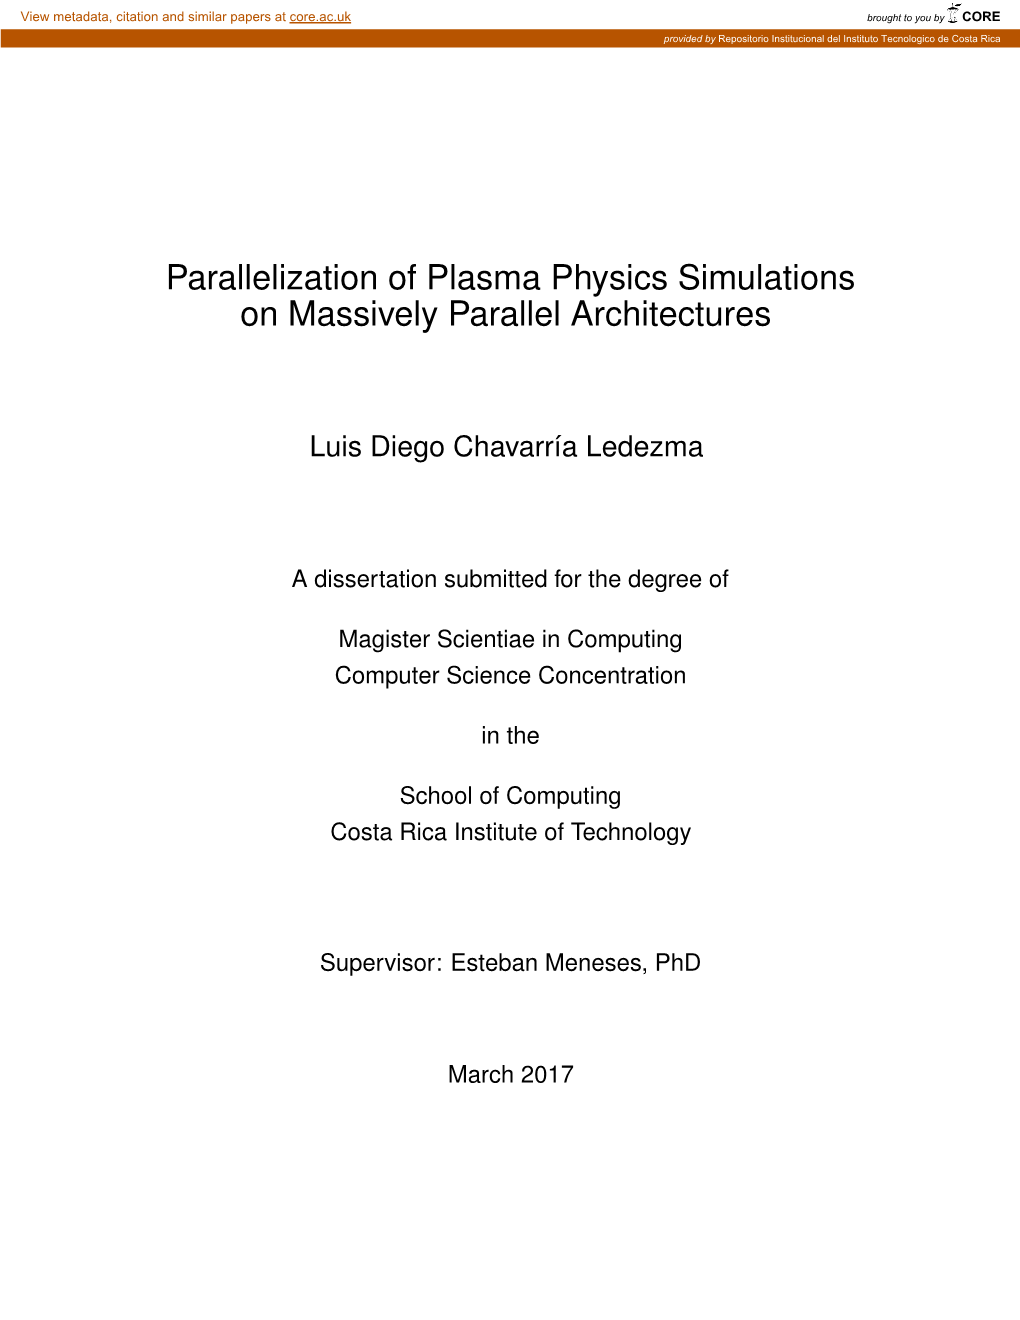 Parallelization of Plasma Physics Simulations on Massively Parallel Architectures